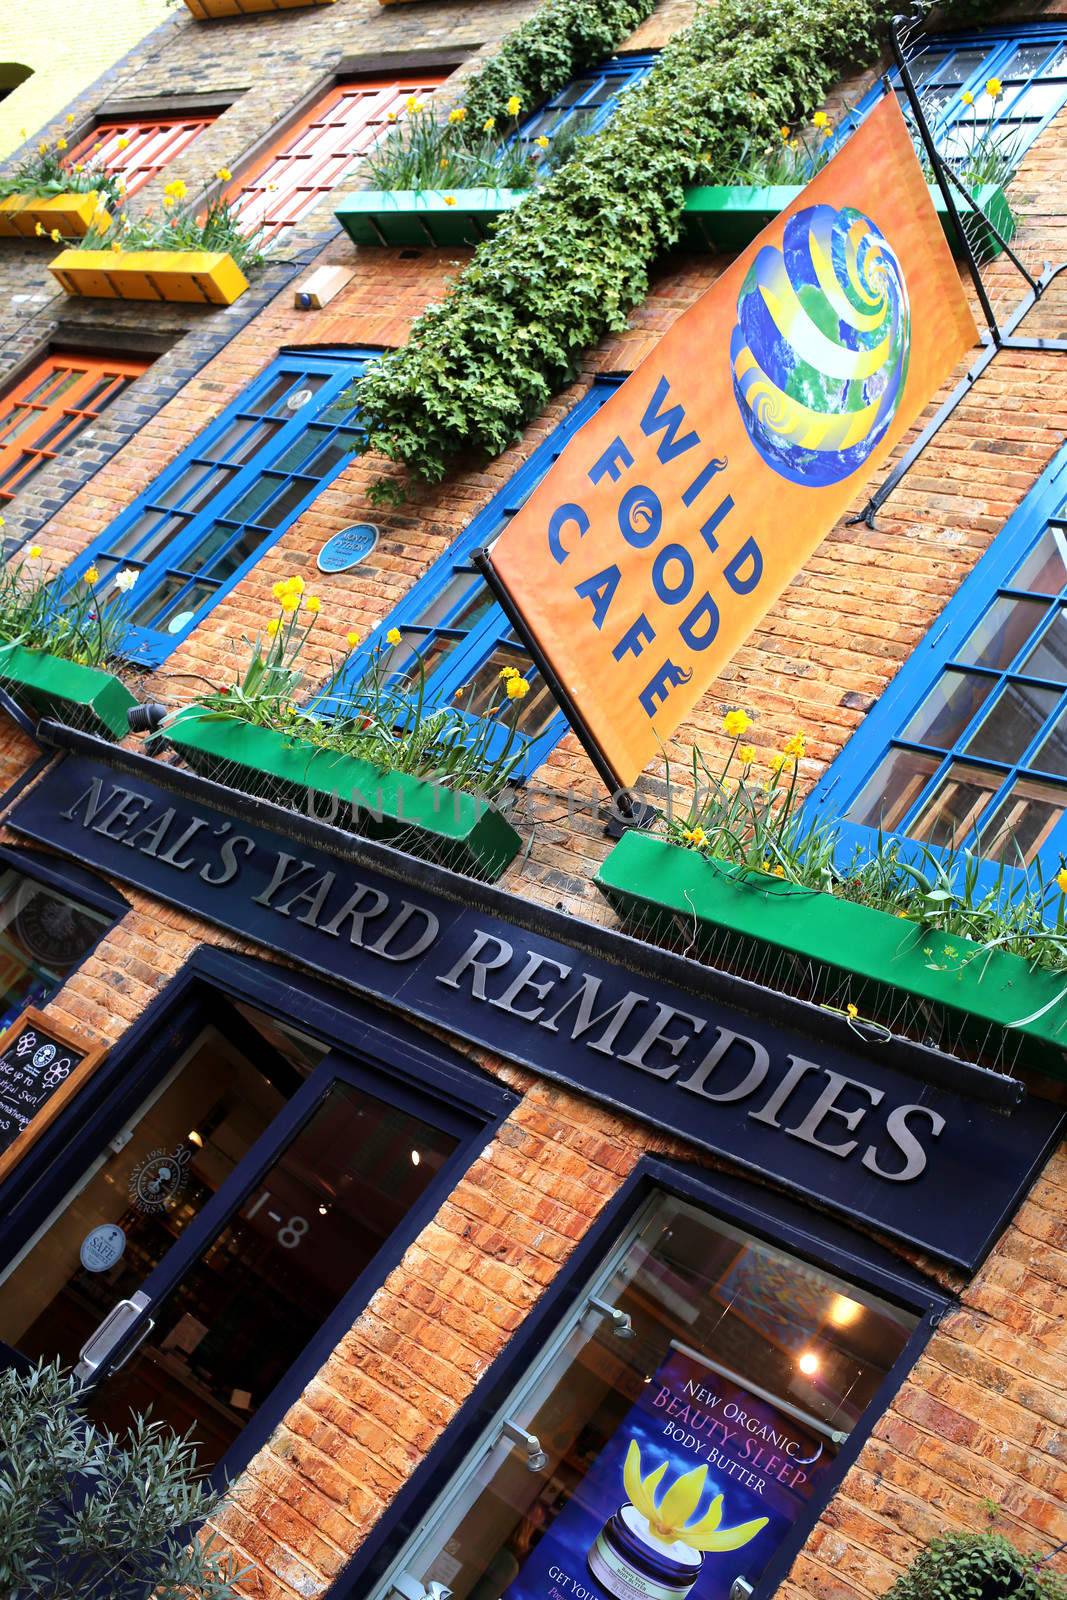 Neals Yard Covent Garden by Whiteboxmedia